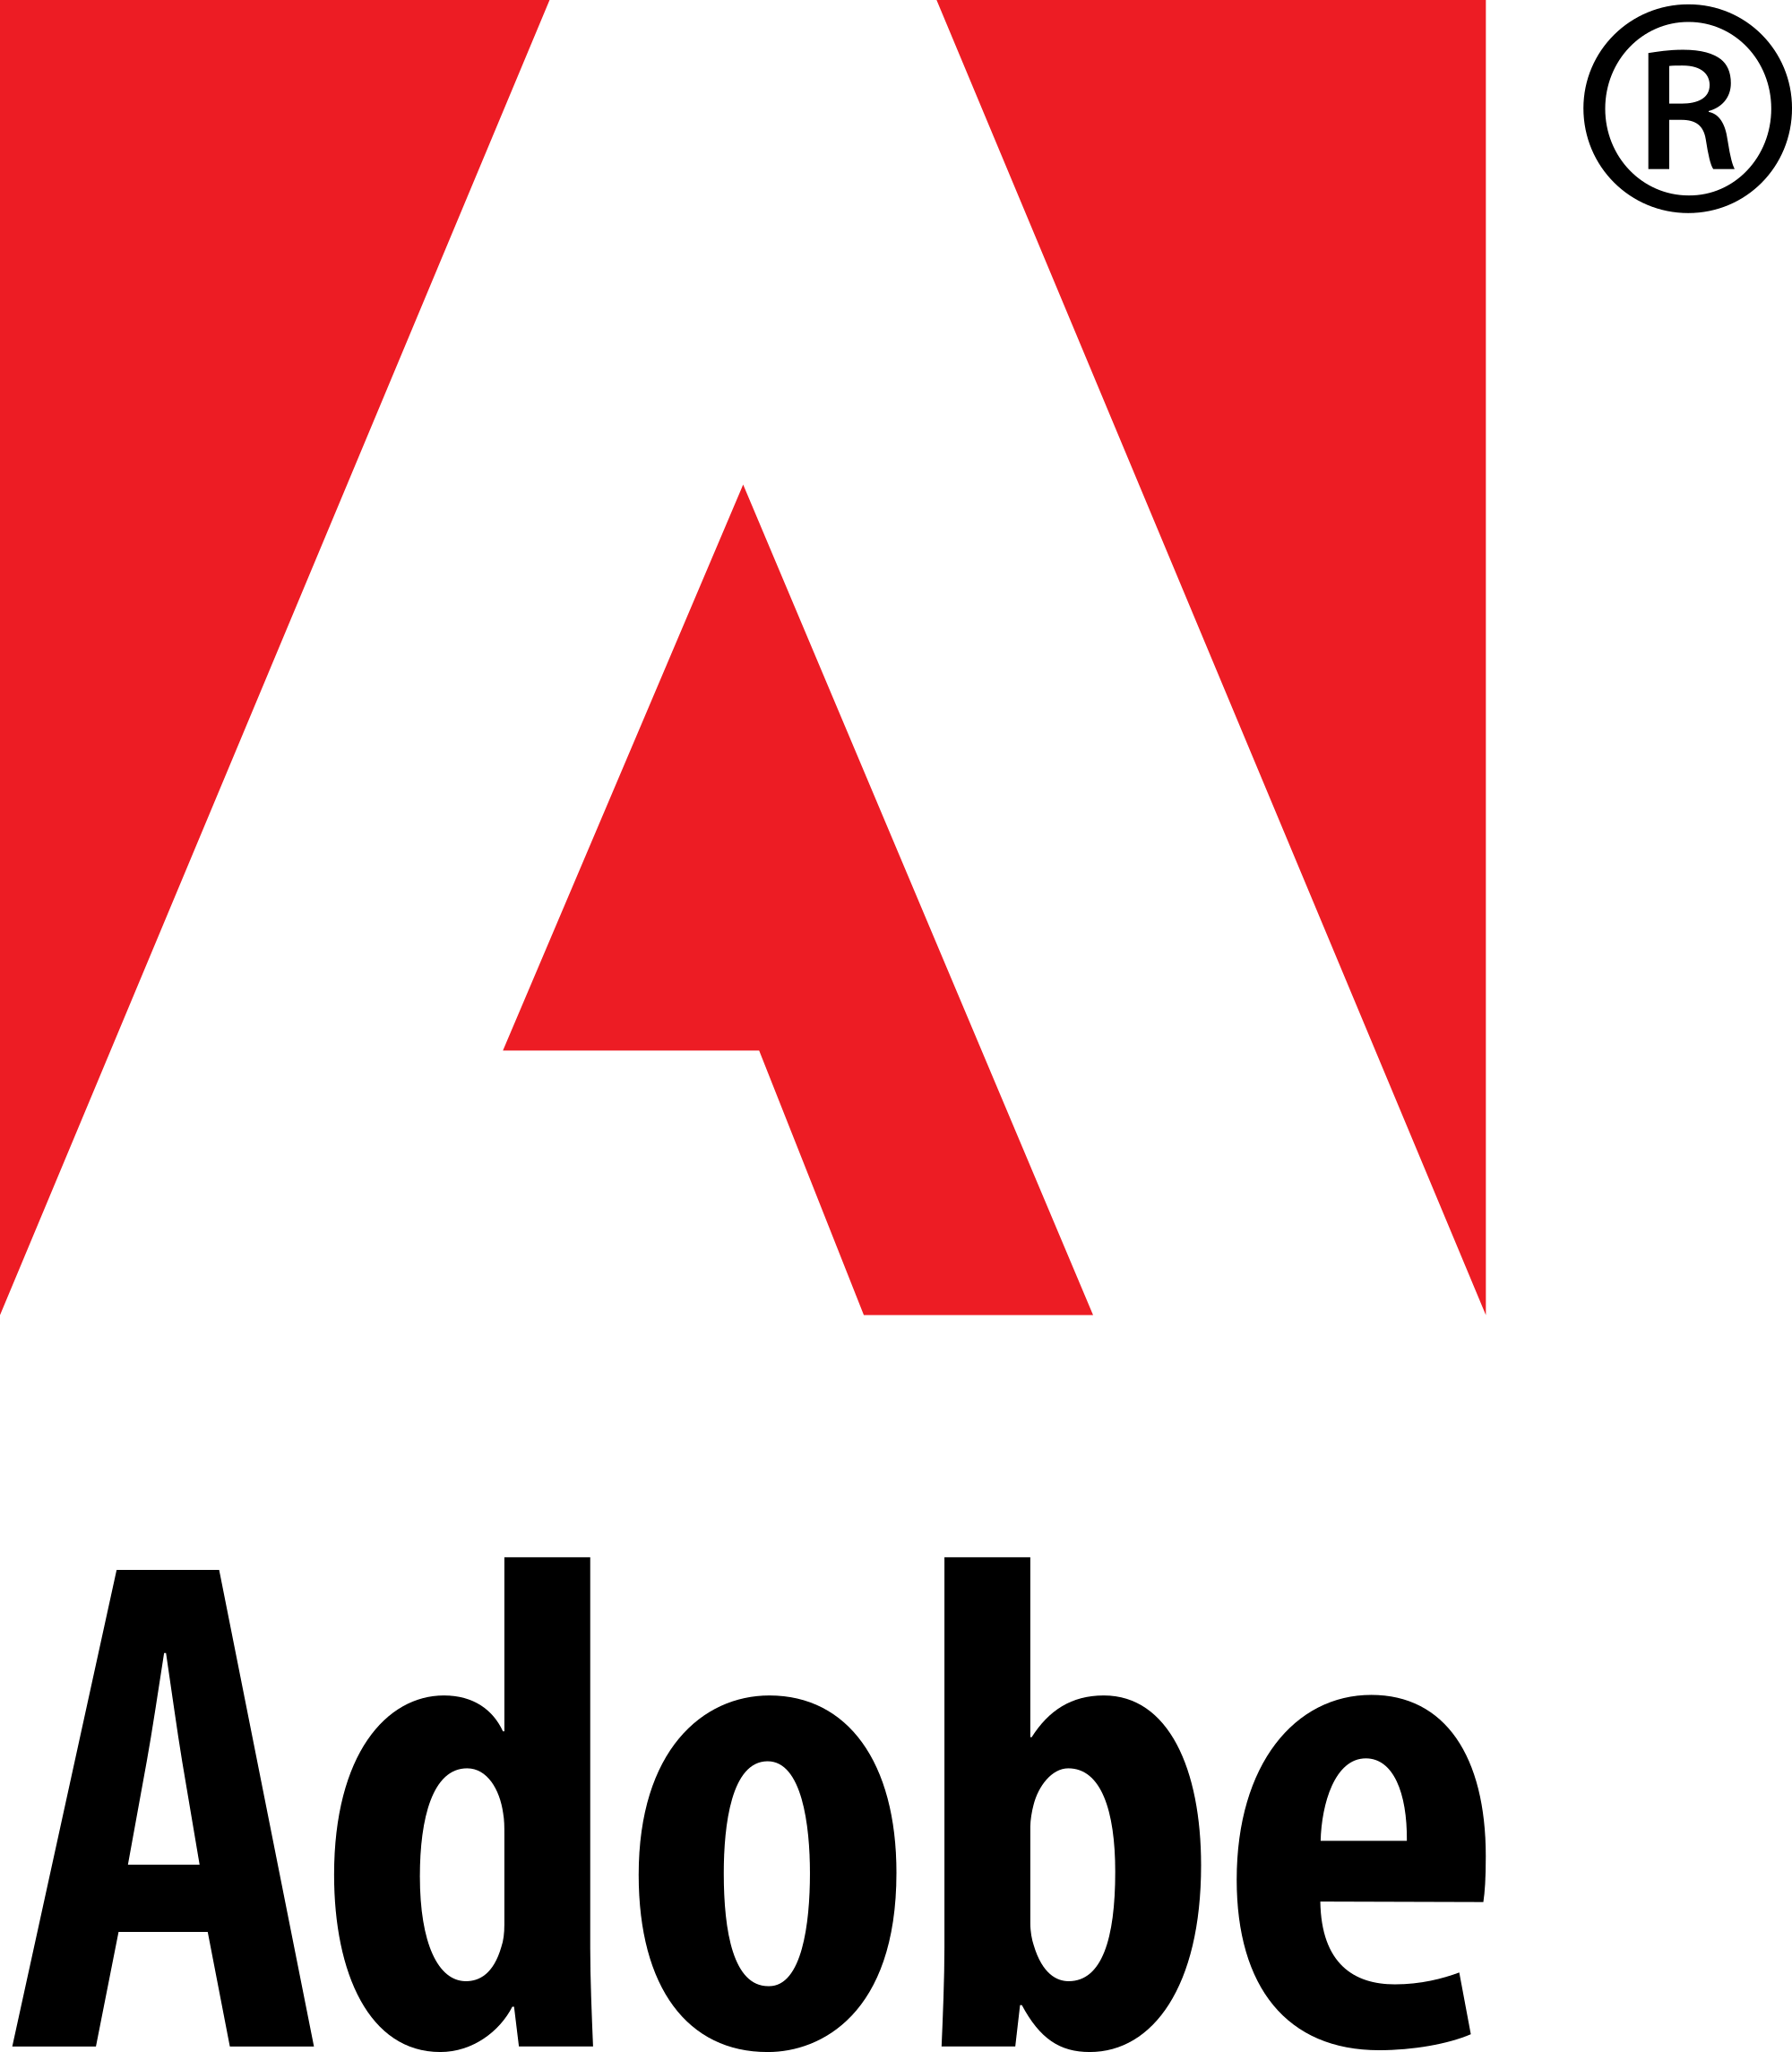 Red a Logo - Adobe Systems logo and wordmark.svg